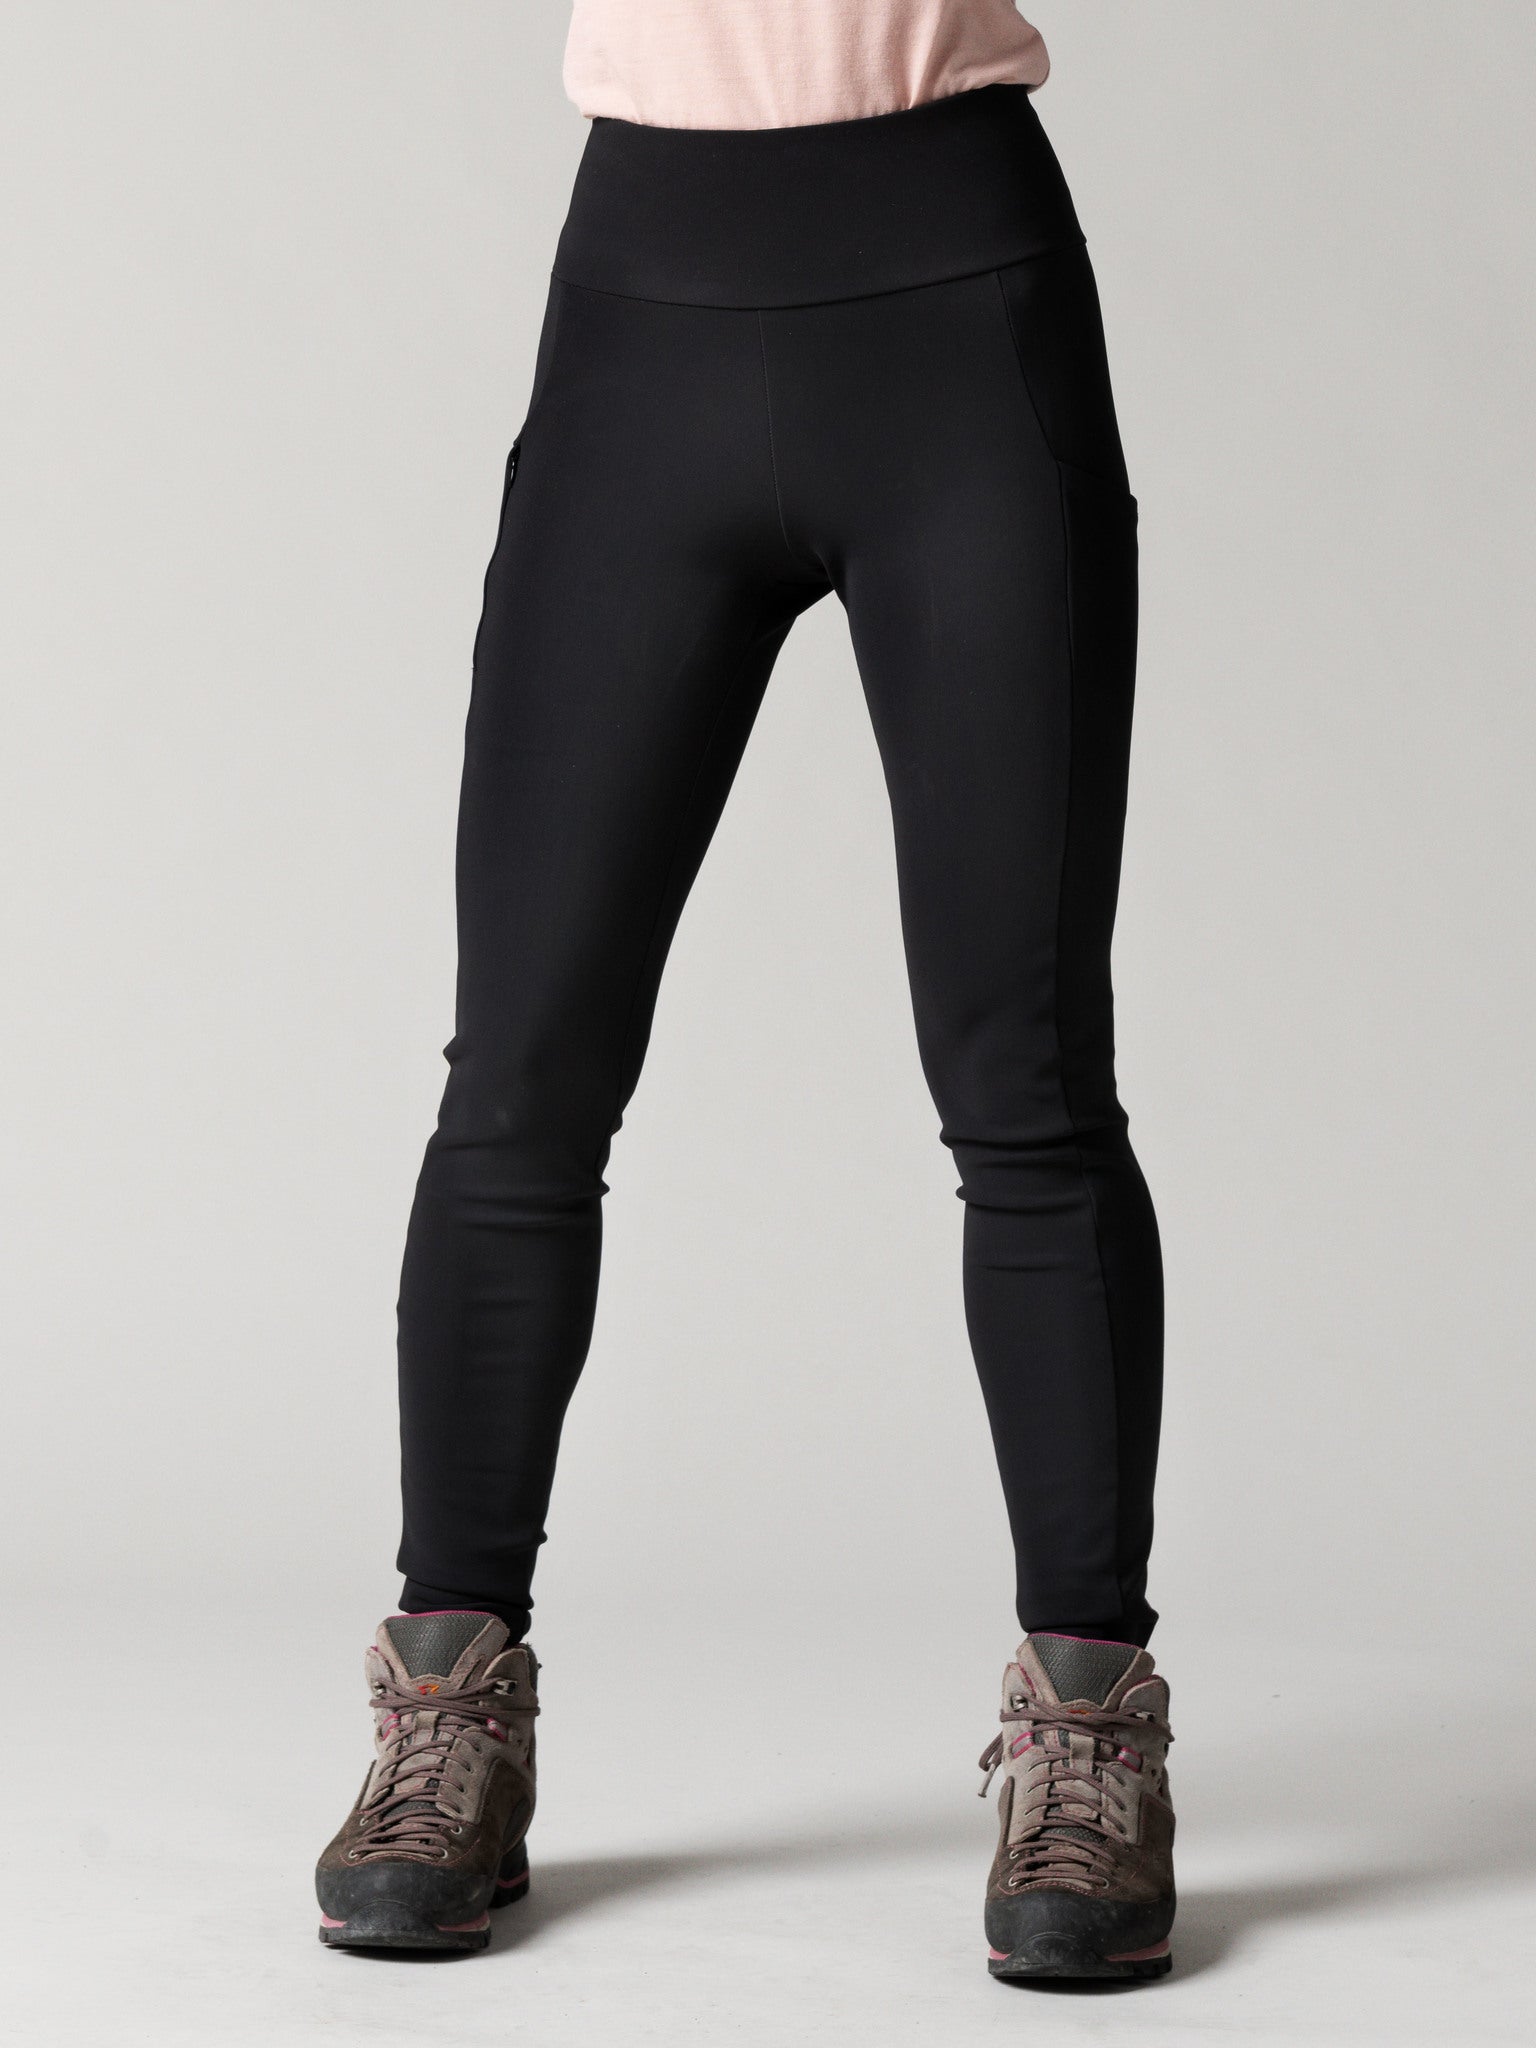 Rosa Hiking Tights for Women